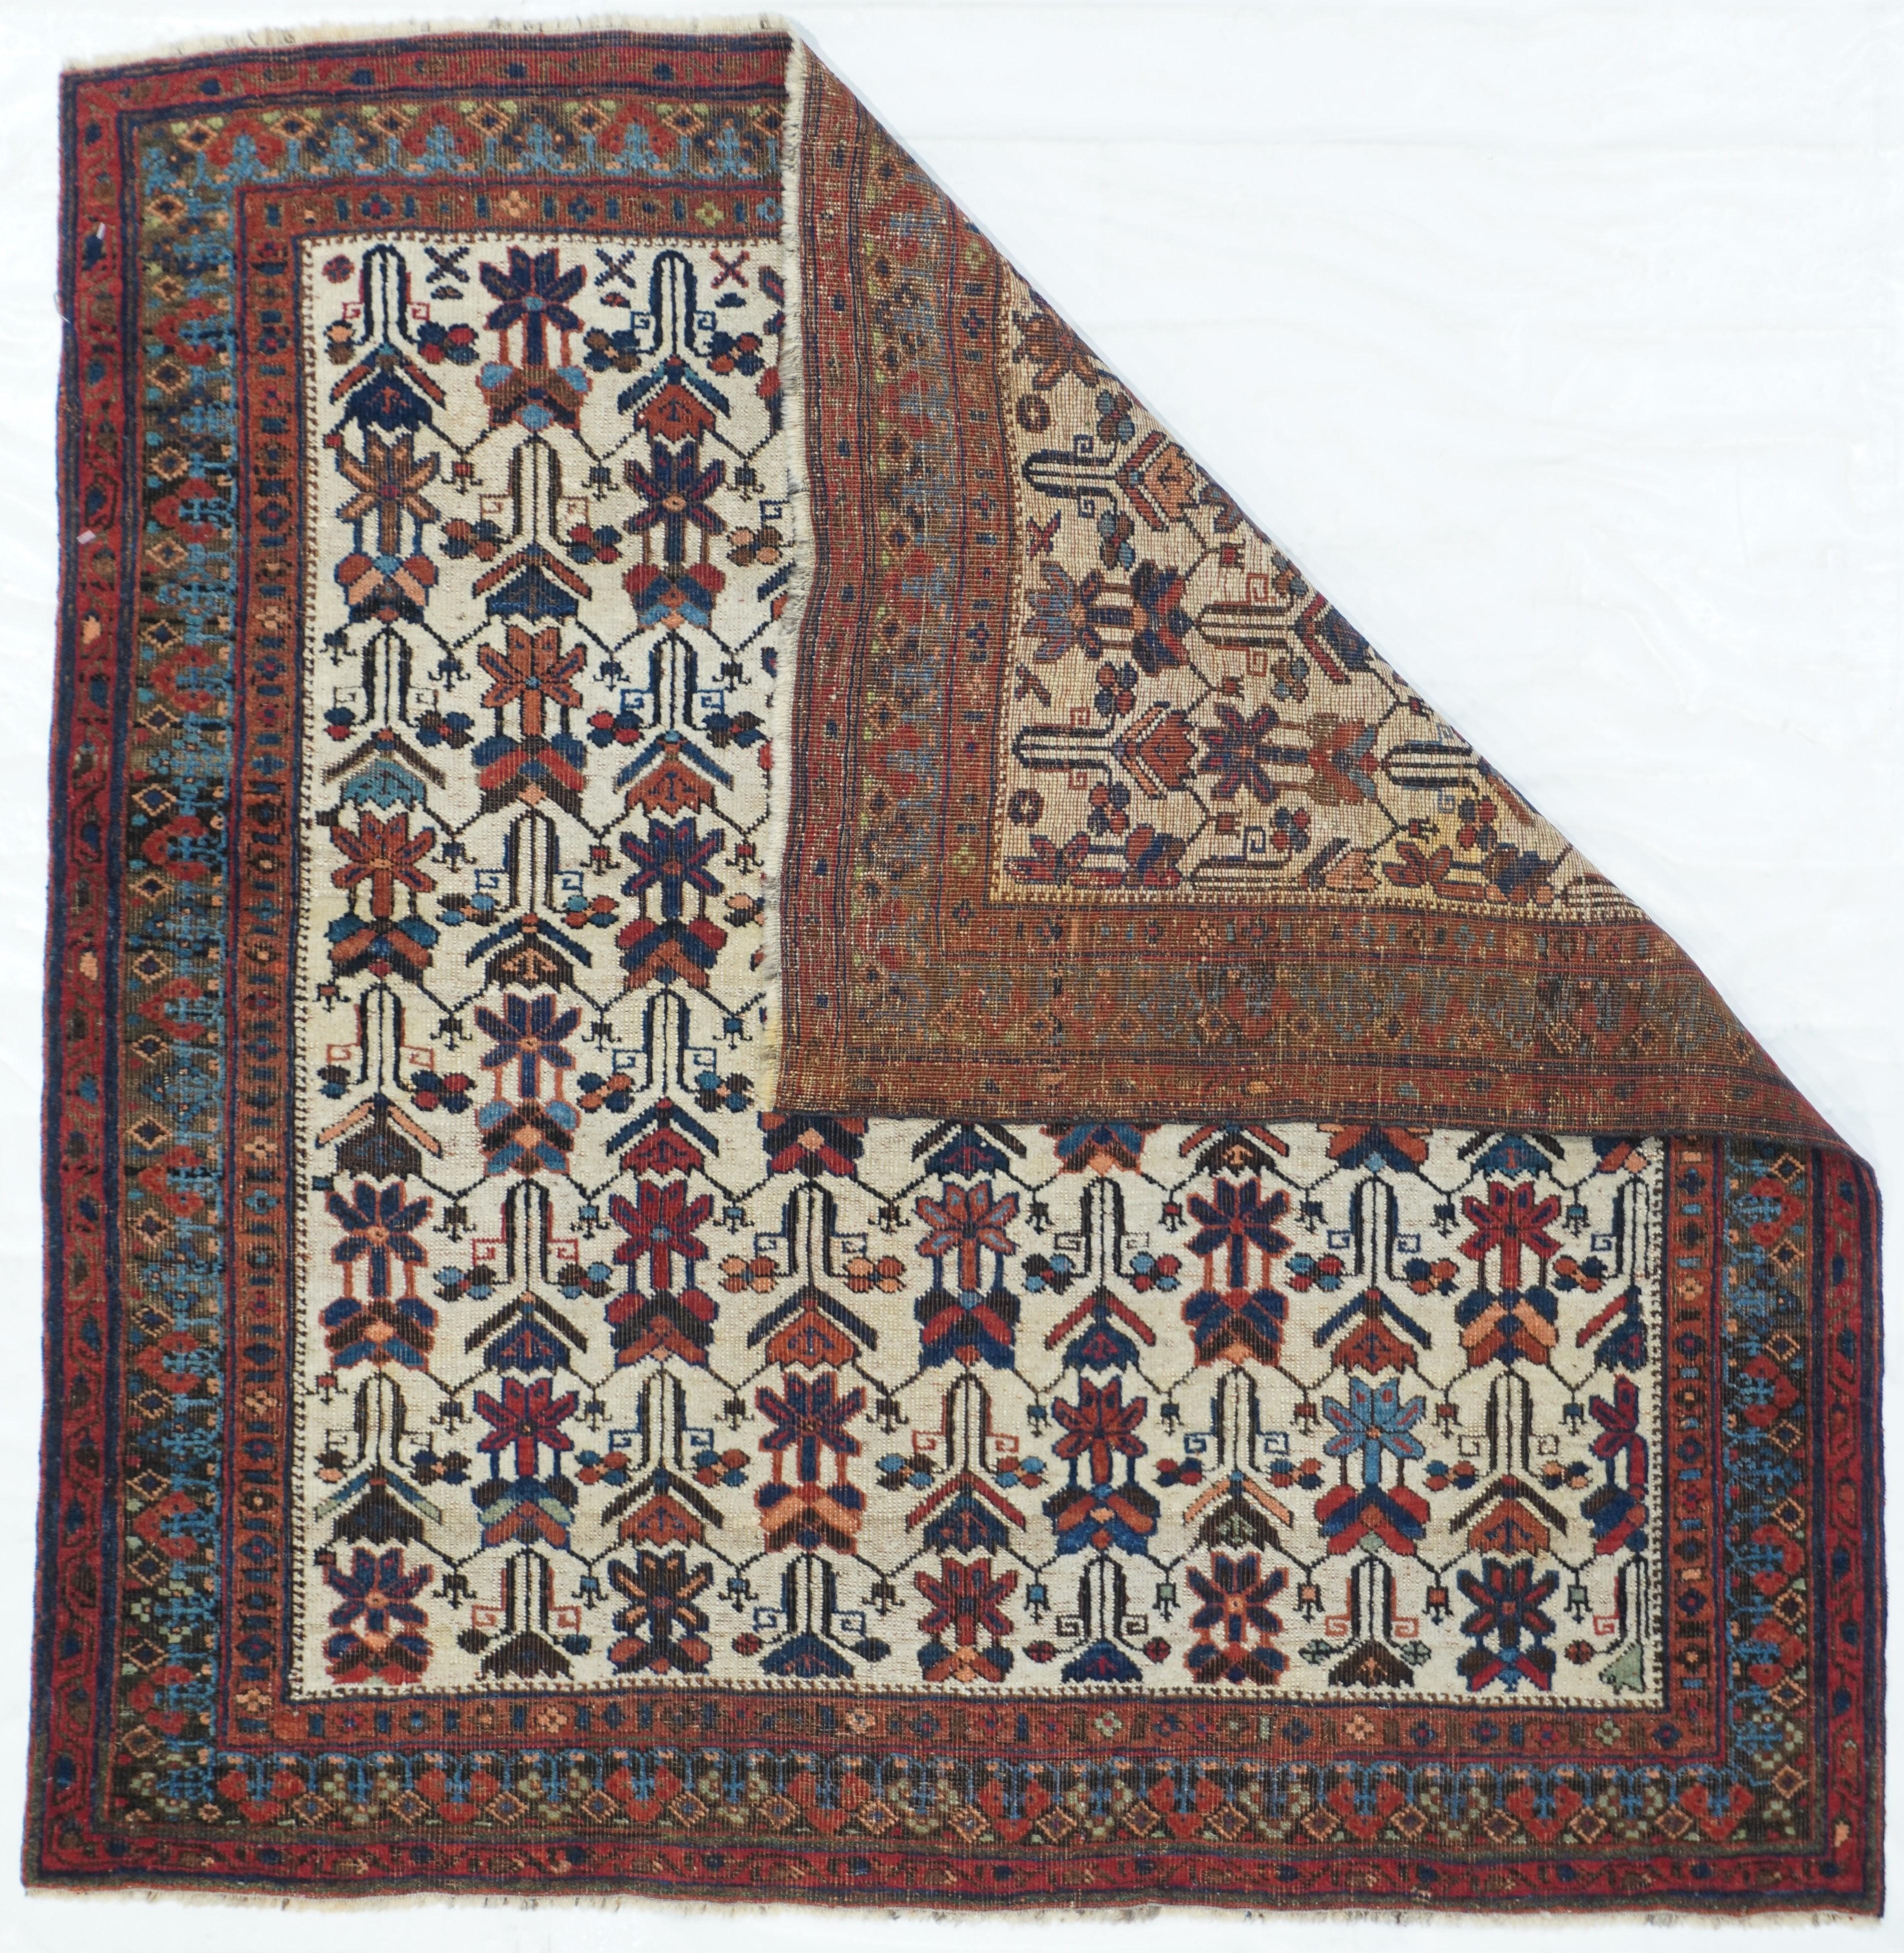 Antique Afshar rug 3'5'' x 3'6''. This SE Persian (Kirman Province) scatter show an off white field with 9 and columns of stylized stacked blossoms and associated leaves. Weaving moved from visual left to right and the tribal weaver did not space